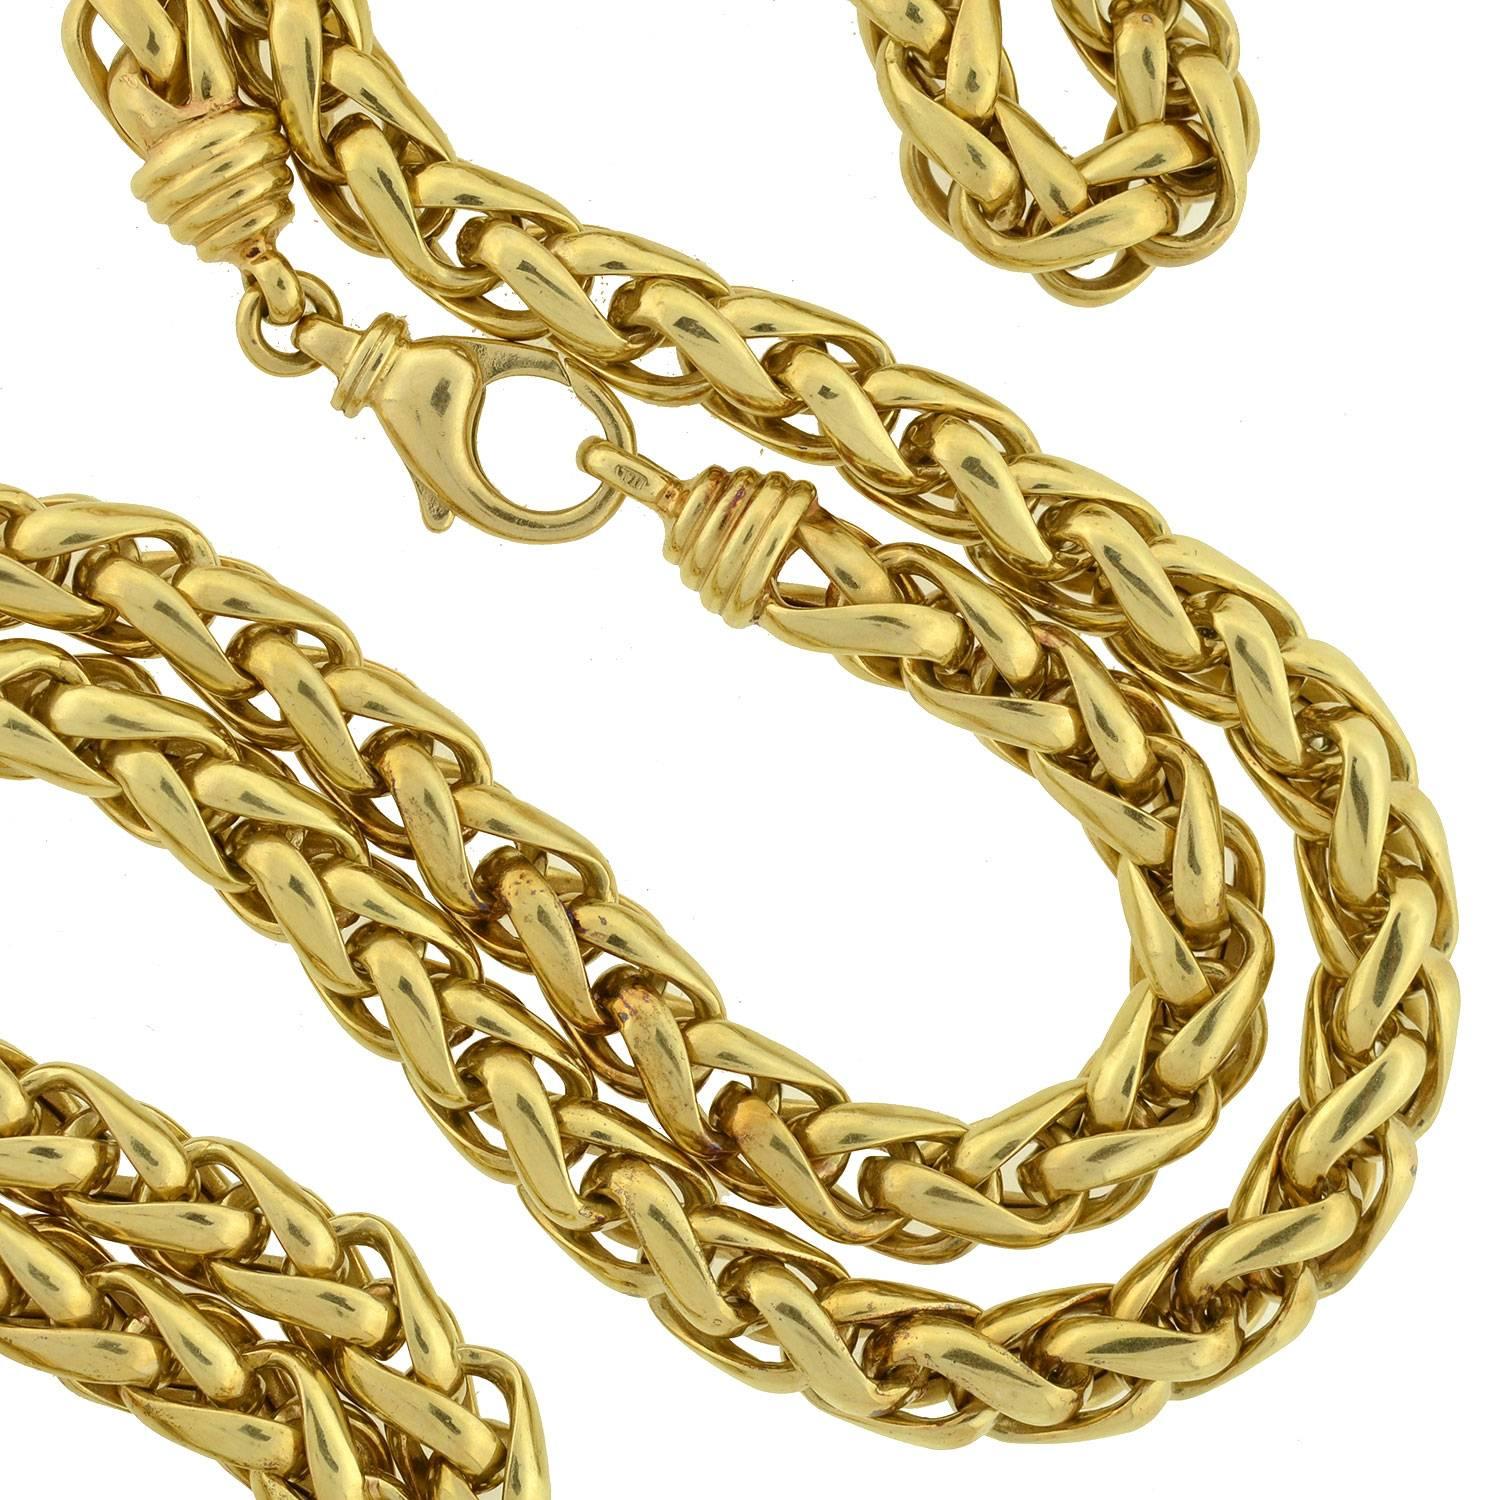 A fabulous Estate necklace with a bold, stylish look! Made of 14kt yellow gold, the gorgeous piece is comprised of 36" of generously sized links which form an eye-catching braided design. The thick rope pattern carries throughout the entire